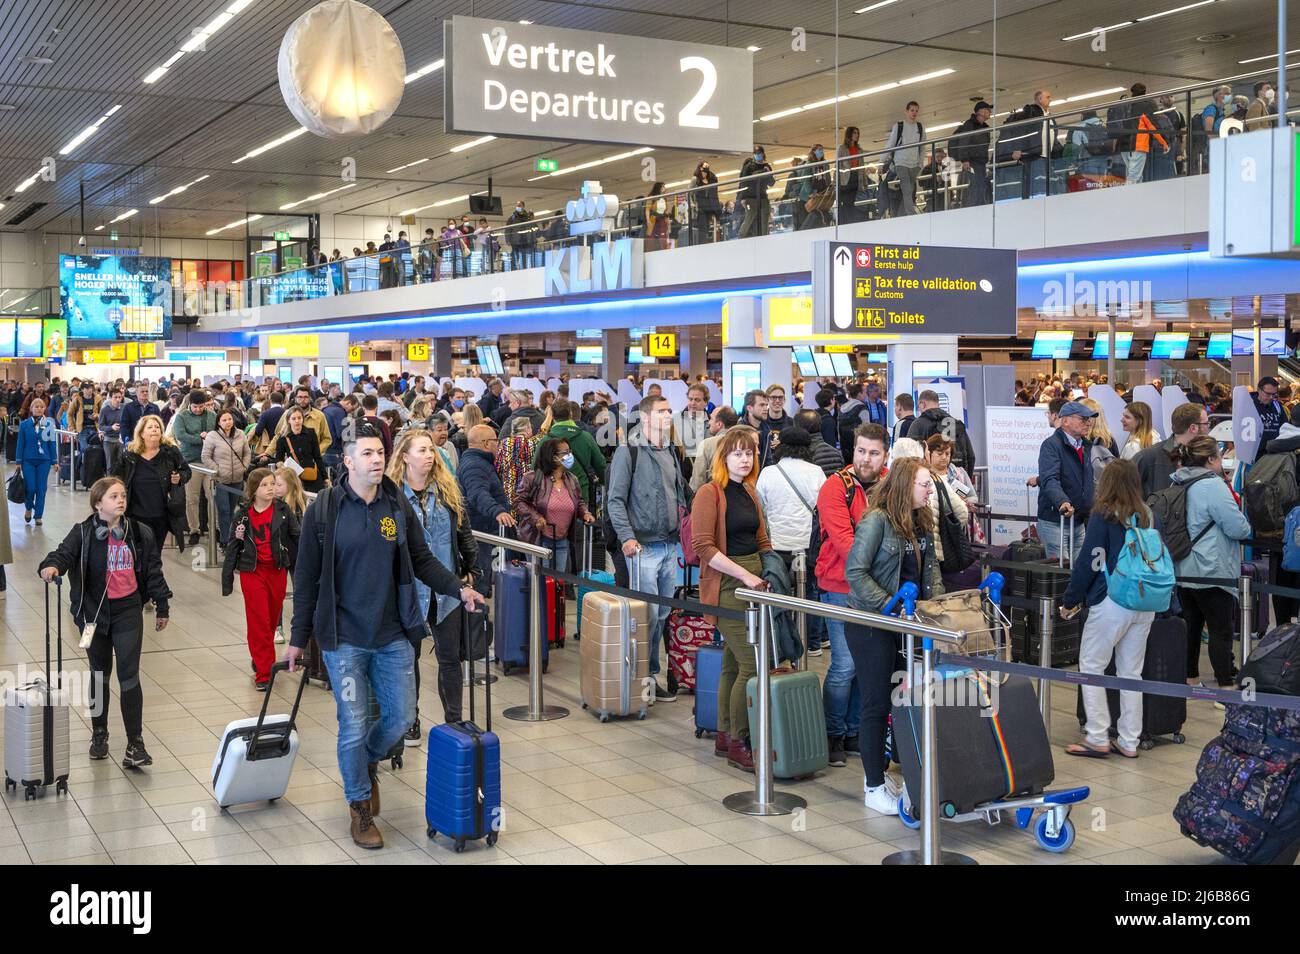 Schiphol, Netherlands. 30th Apr, 2022. 2022-04-30 06:47:16 SCHIPHOL - Schiphol Airport is very busy this weekend. The airport is facing serious staff shortages because there are hundreds of vacancies at the check-in desks, security and in the baggage basement that cannot be filled. ANP EVERT ELZINGA netherlands out - belgium out Credit: ANP/Alamy Live News Stock Photo